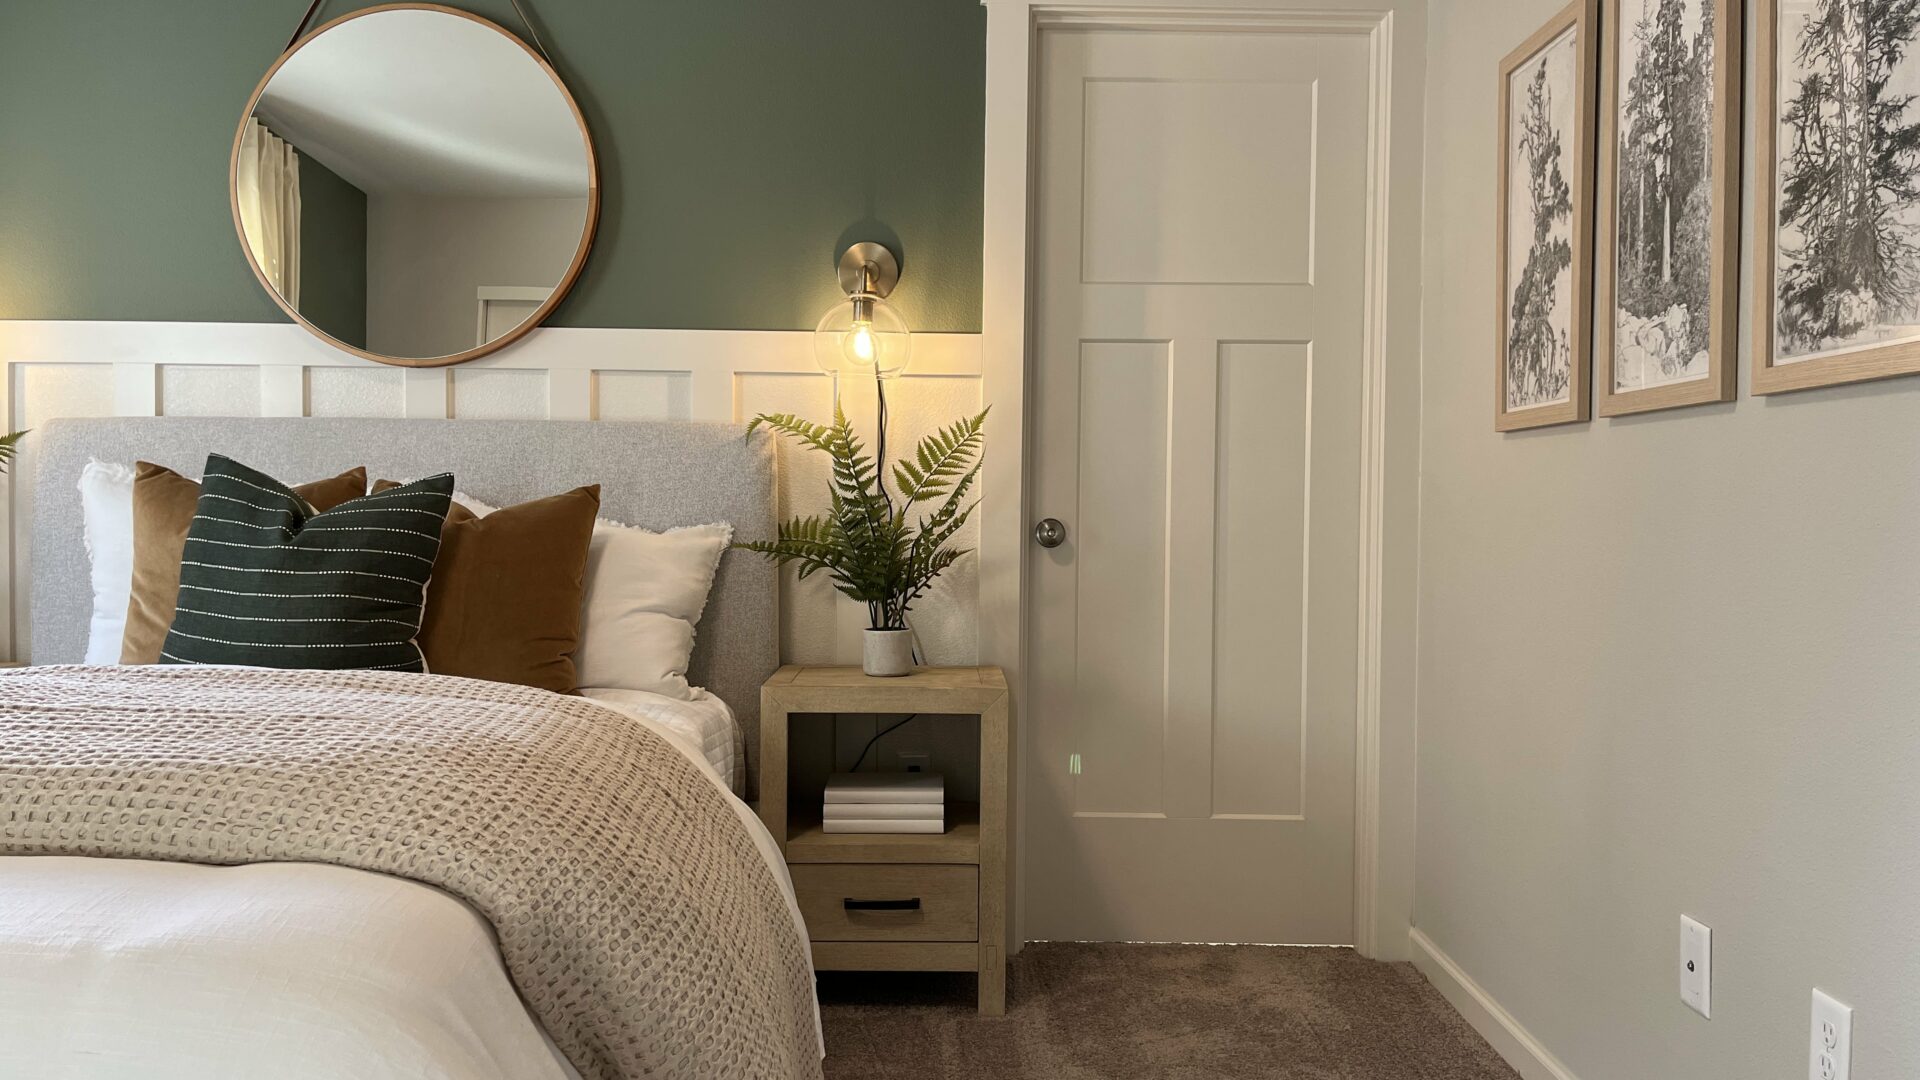 Lennar bedroom decor with green and white walls